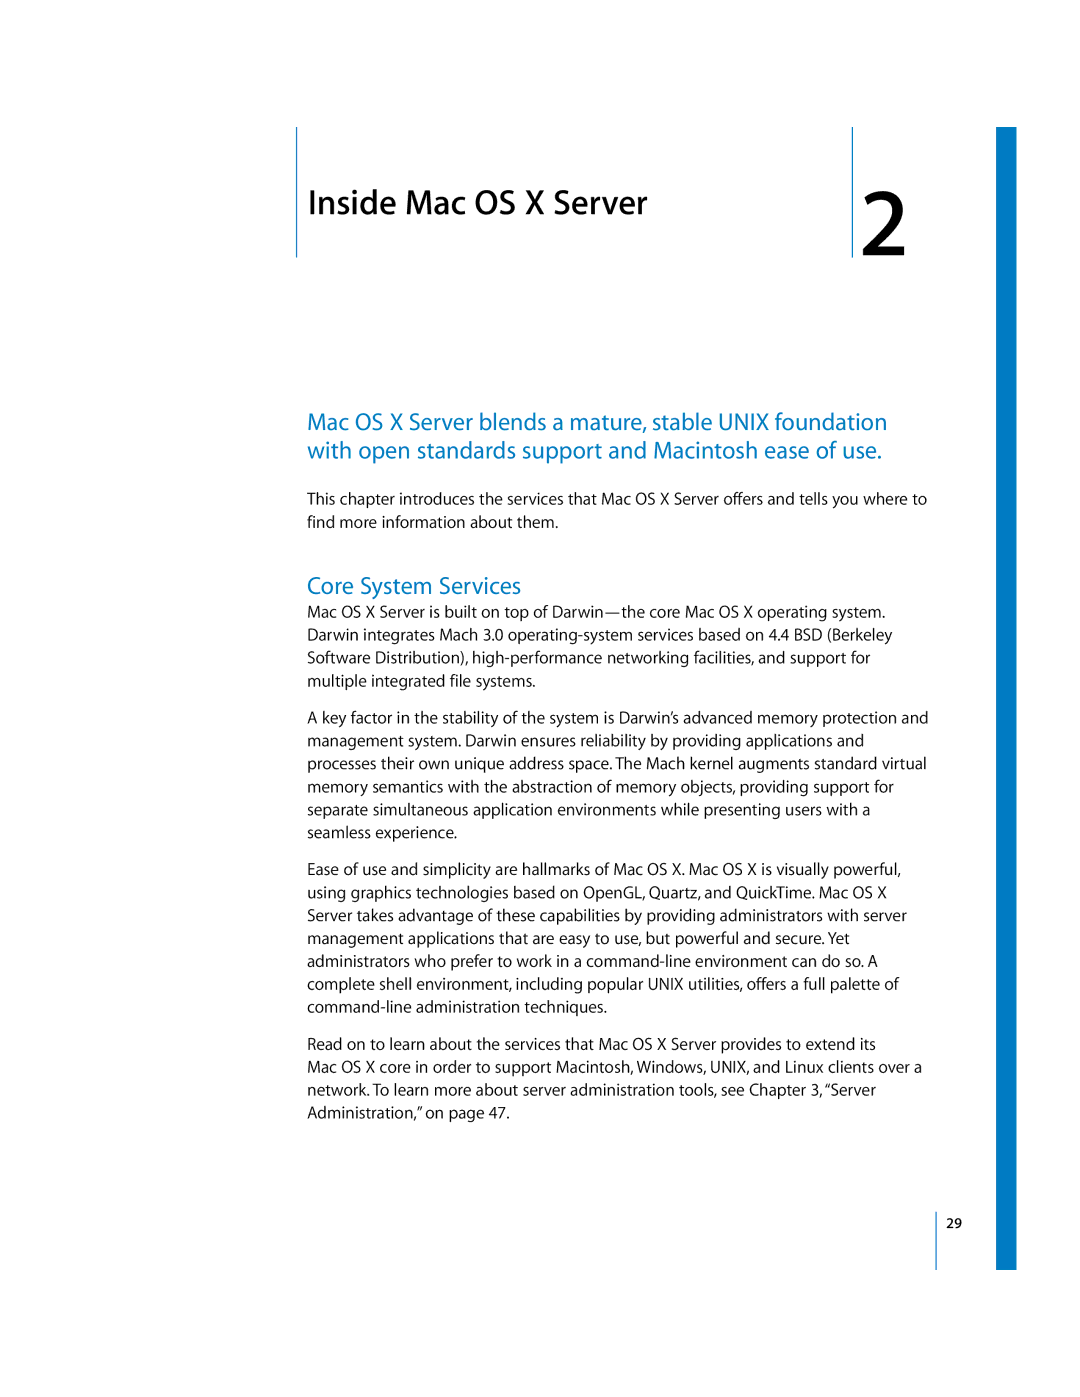 Apple 10.3 manual 2Inside Mac OS X Server, Core System Services 